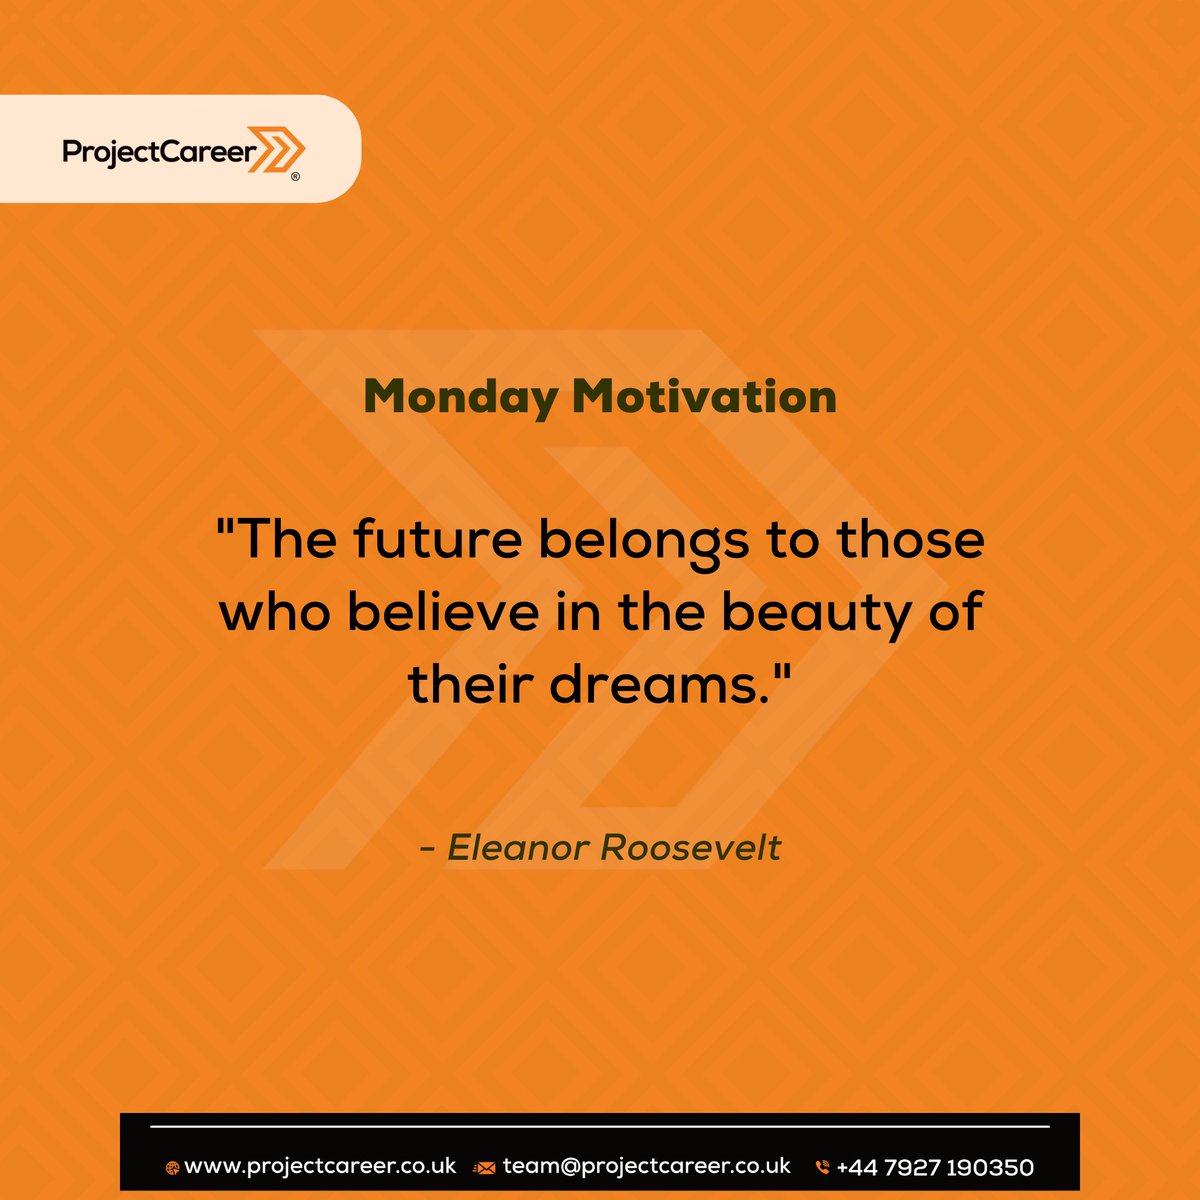 Happy Monday, everyone! ​​​​​​​​​If you've been dreaming of a successful career in project management, we at ProjectCareer can help make it a reality. 
#frankocean 
#westbrook
#MondayMotivation 
#Arsenal 
#Welsh
#EducationSavesLives
#Guinea
#projectmanagement 
#onlinelearning